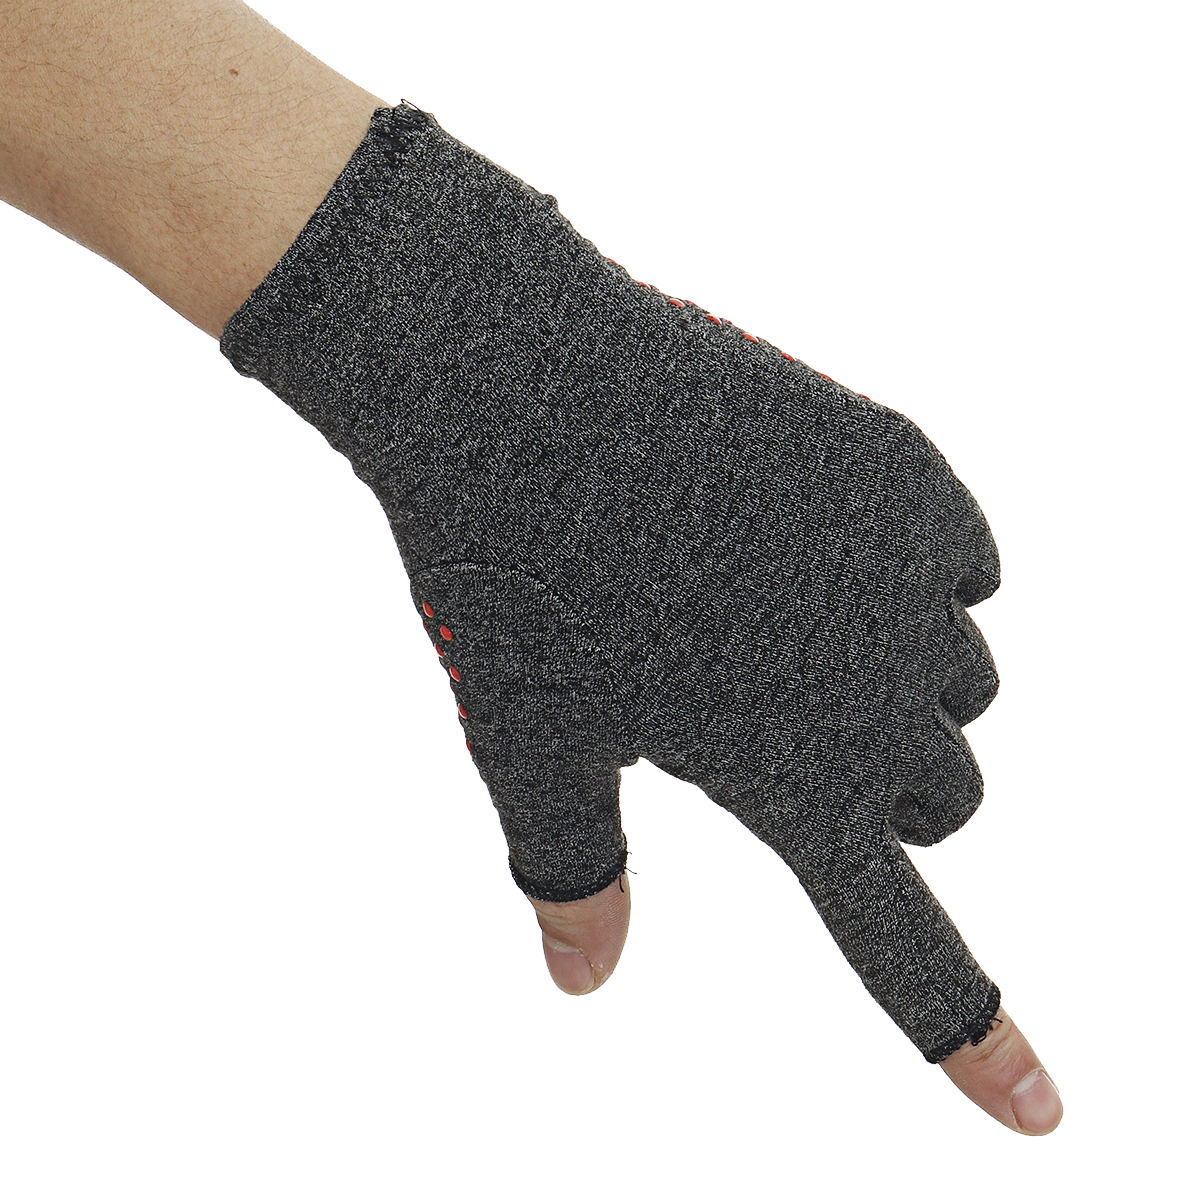 1-Pair-Compression-Arthritis-Gloves-Arthritic-Joint-Pain-Relief-Hand-Gloves-Therapy-Open-Fingers-Com-1777634-6